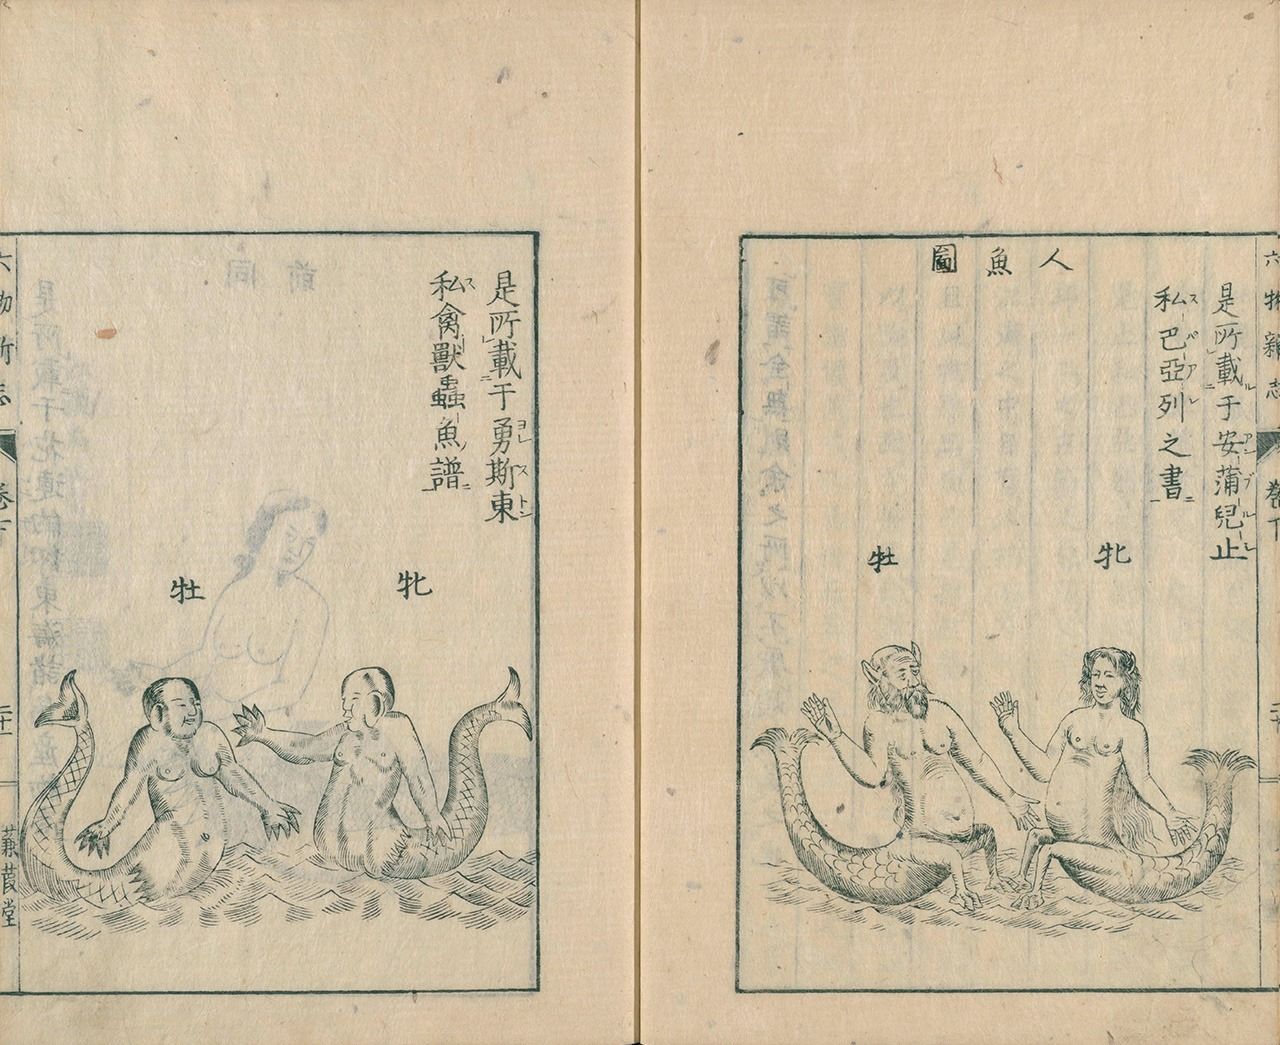 Illustrations of merfolk in Rokumotsu shinshi (New Applications for Six Things) taken from works by John Jonston (left) and Ambroise Paré. (Courtesy National Diet Library Digital Collection)